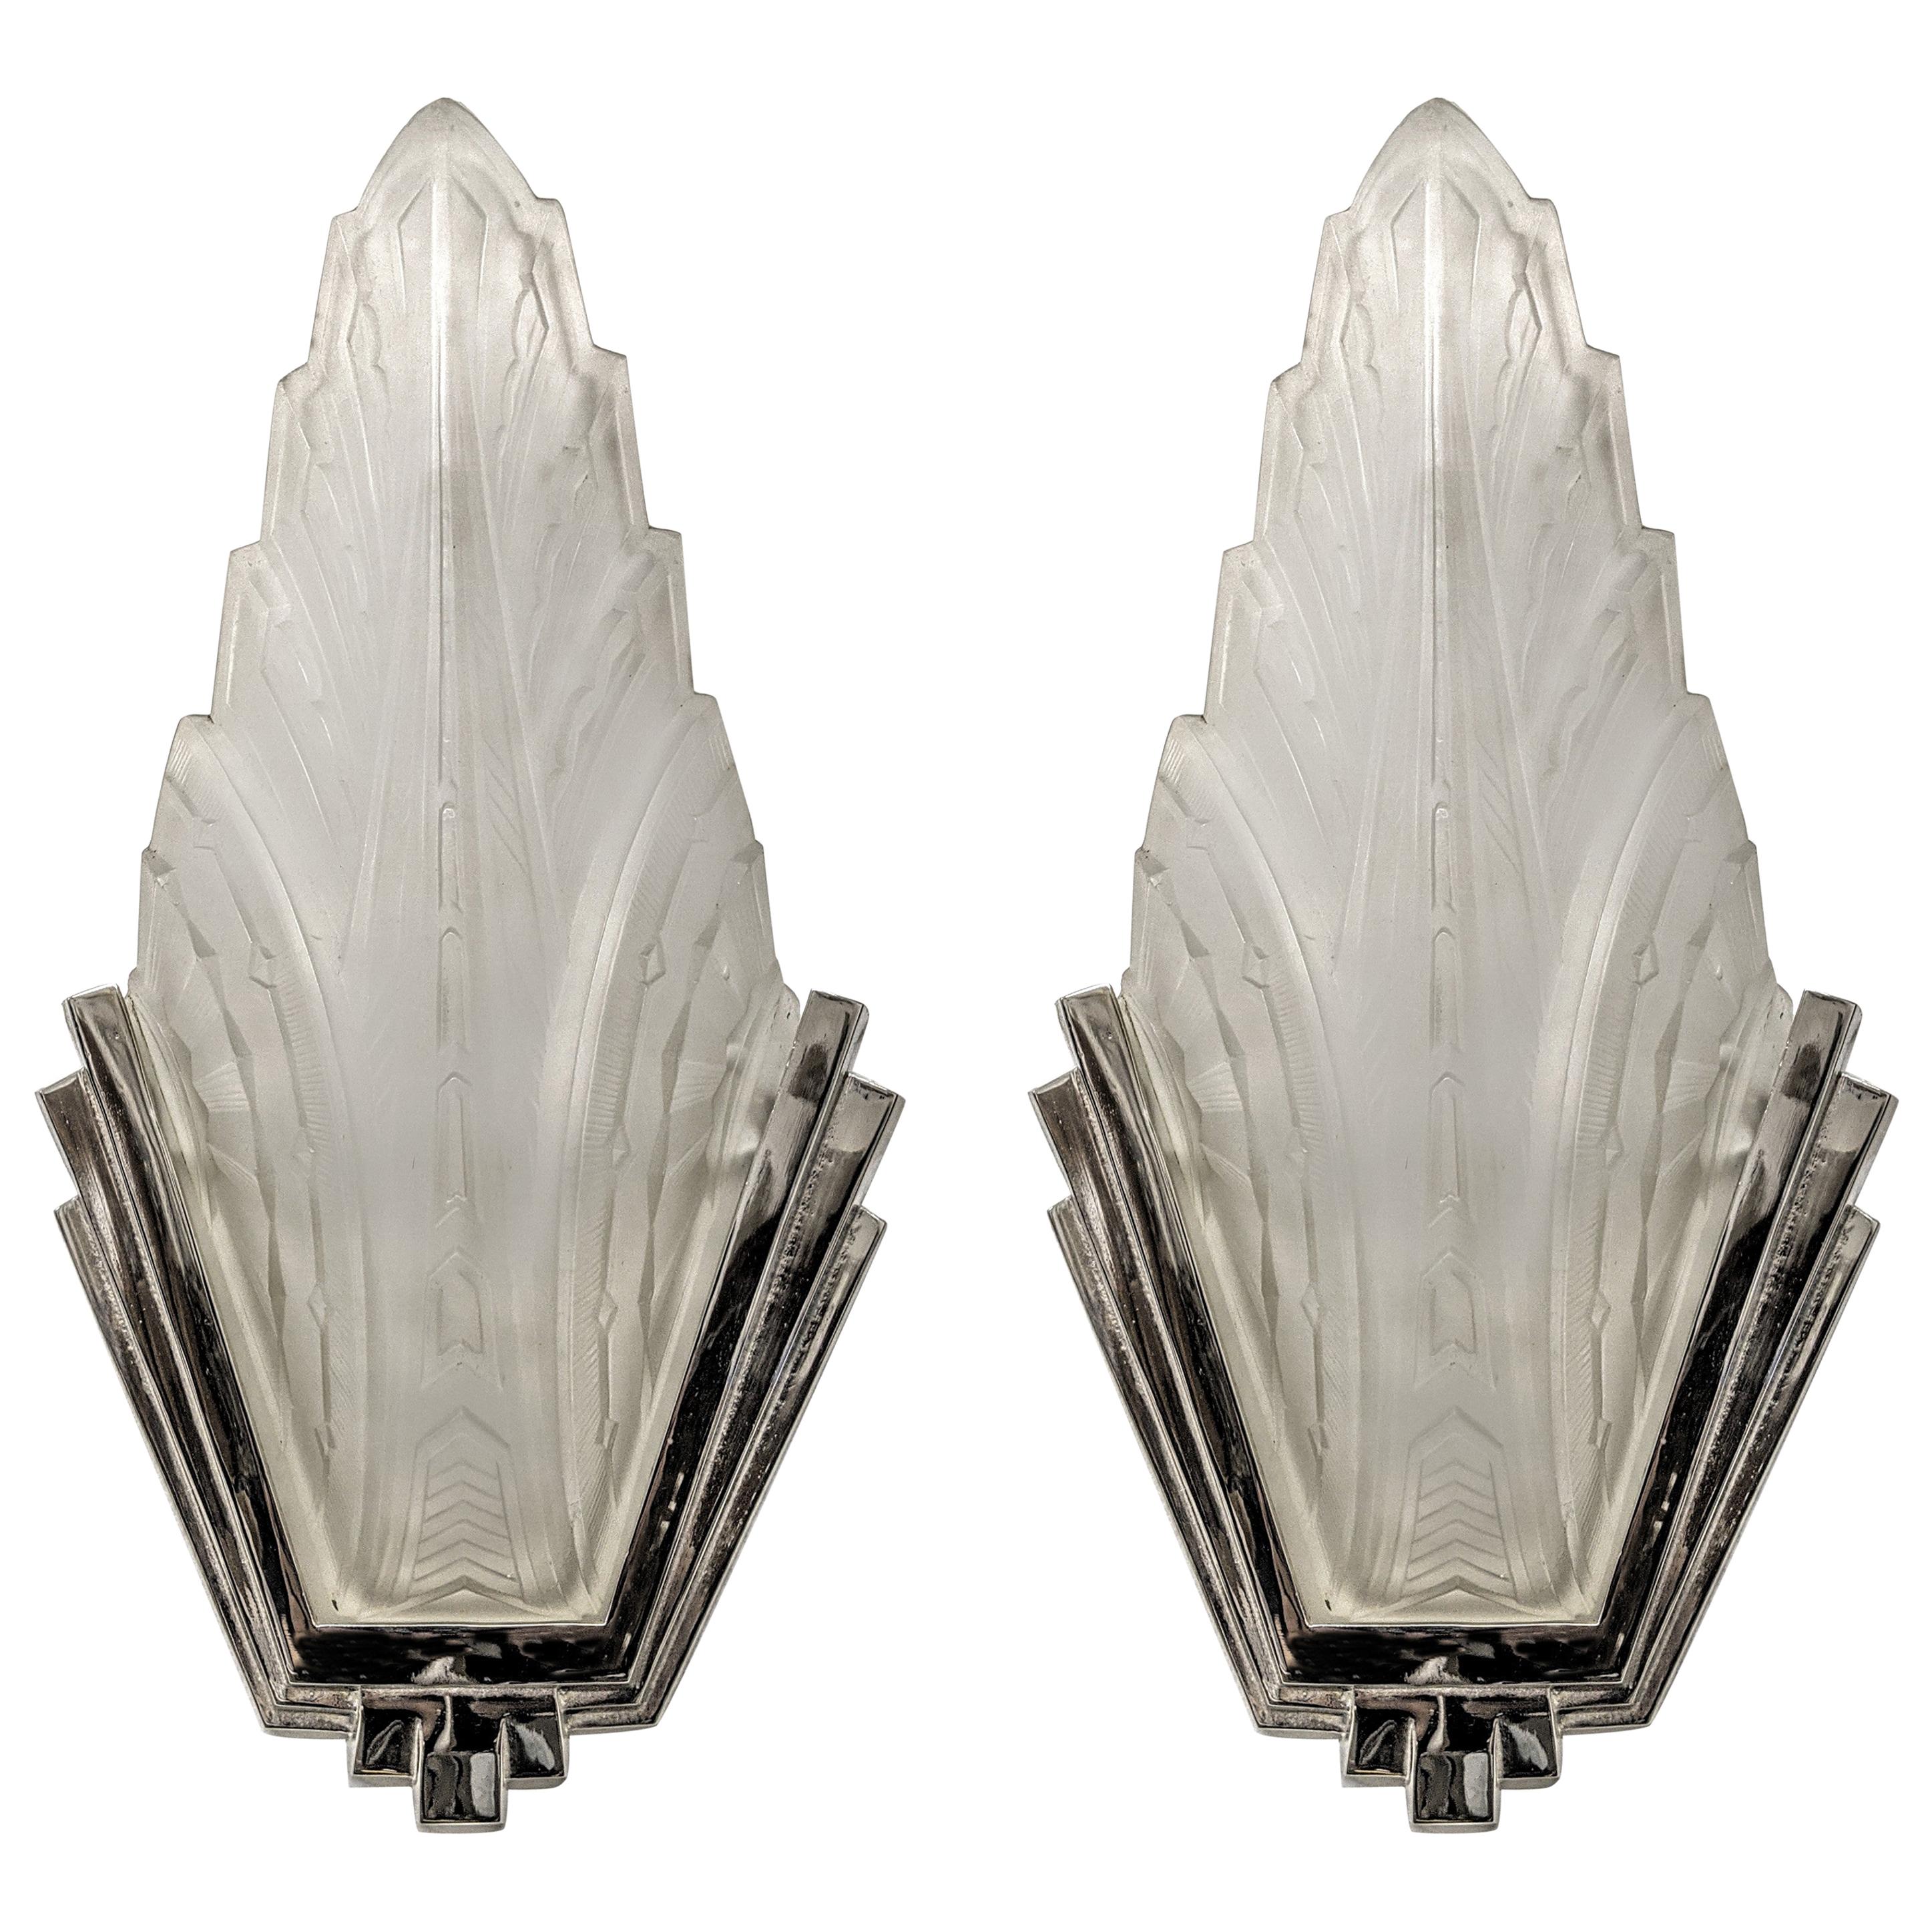 Pair of French Art Deco Wall Sconces Signed by Hanots (two pair available)